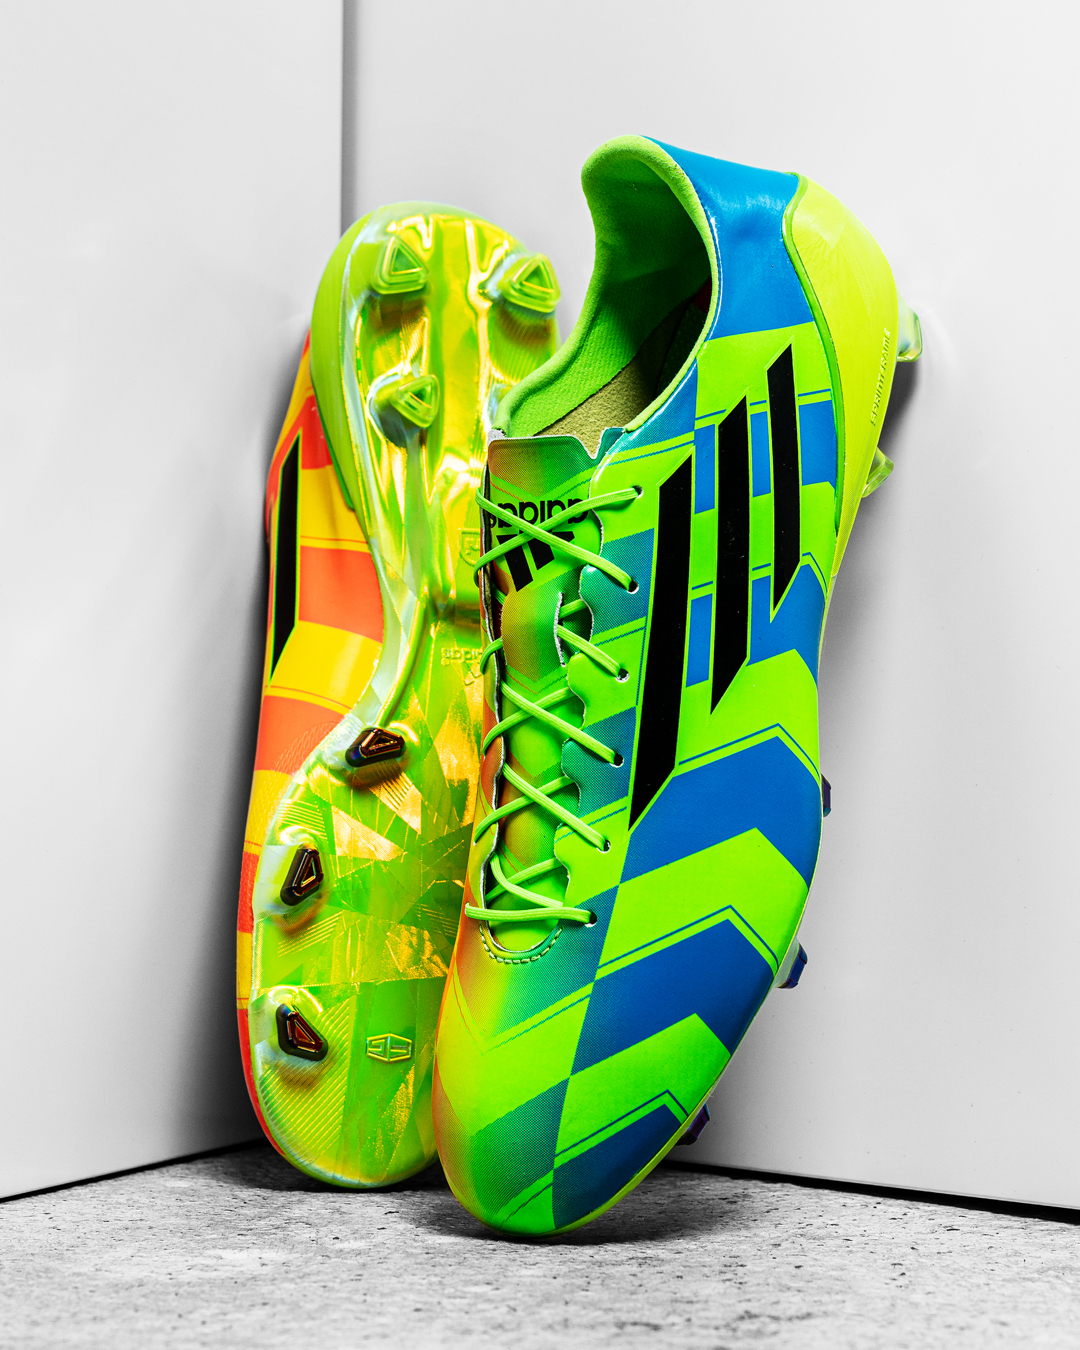 unisportlife on X: "Remember this boot? The adidas F50 Crazylight is one of the most insane and best looking boots ever Would you like this colourway to make a